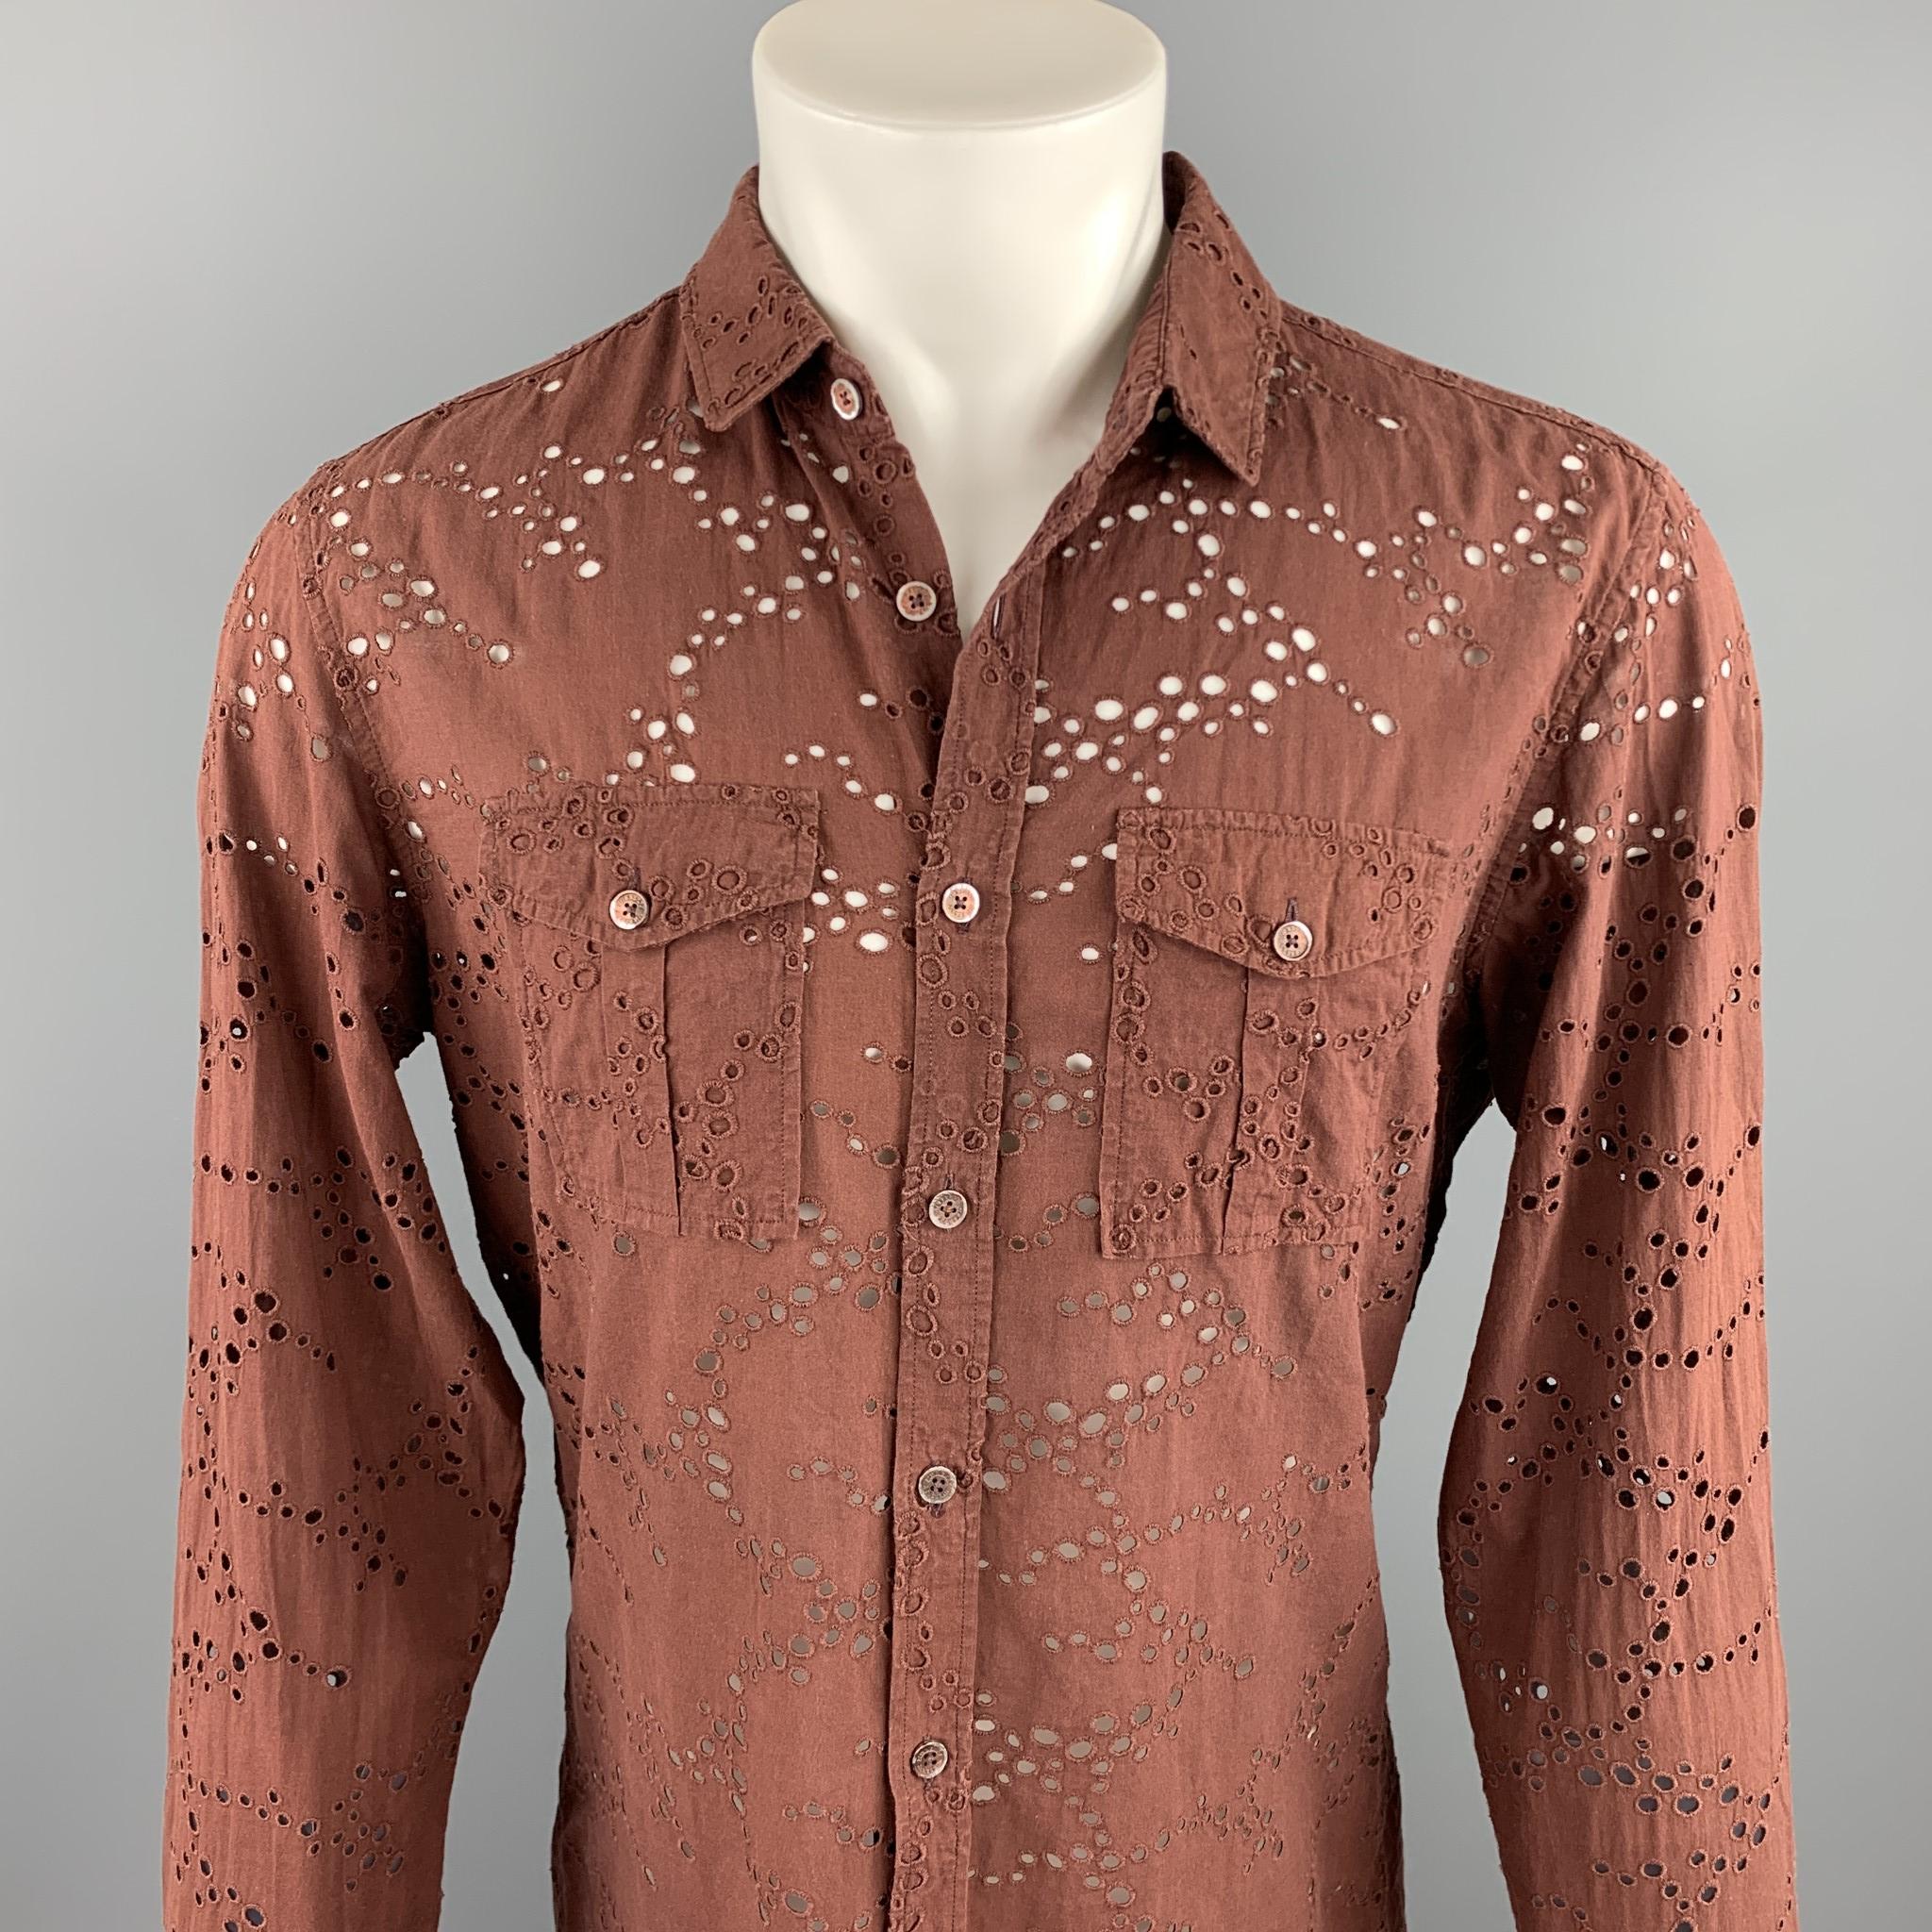 BURBERRY PRORSUM long sleeve shirt comes in a brown eyelet cotton featuring a button up style, patch pockets, and a spread collar. As-Is. Made in Italy.

Excellent Pre-Owned Condition.
Marked: 43-17

Measurements:

Shoulder: 17.5 in. 
Chest: 42 in.